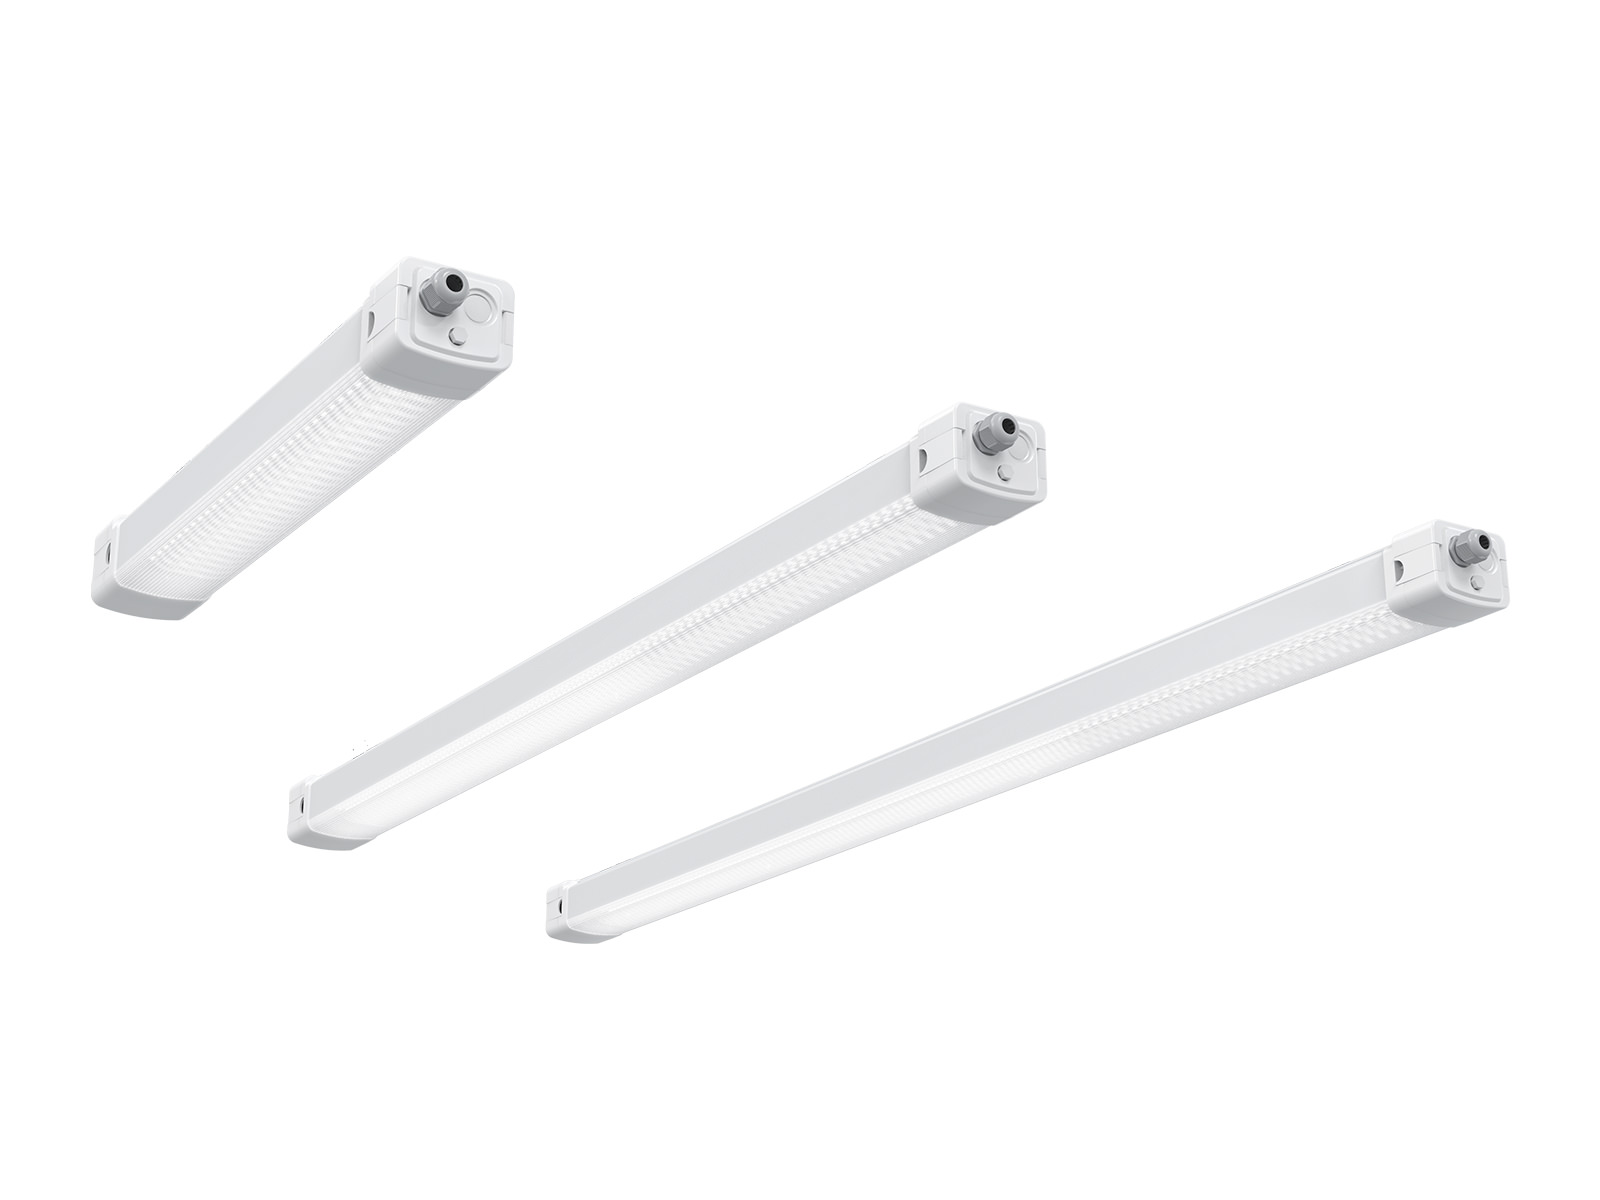 Eco friendly alternative lighting system to traditional fluorescent tubes